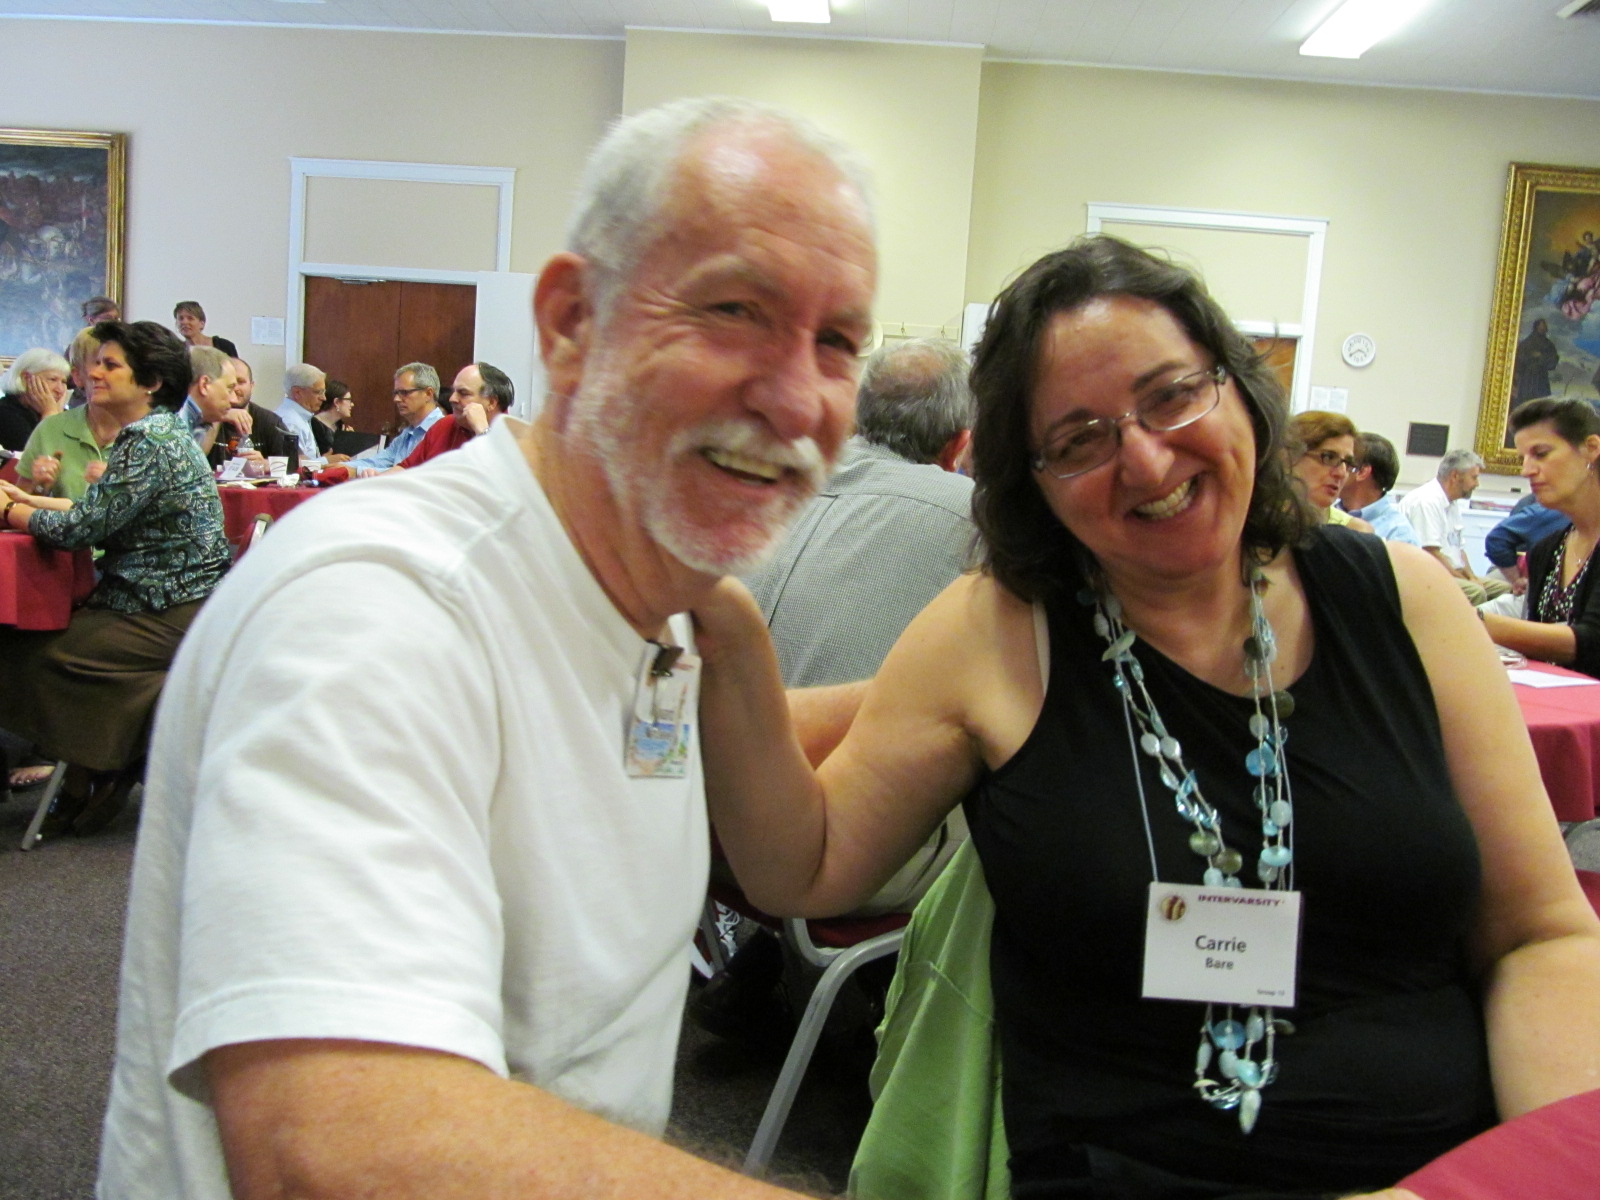 Howard Van Cleave and Carrie Bare honor one-another at 2012 GFM National Staff Team Meetings